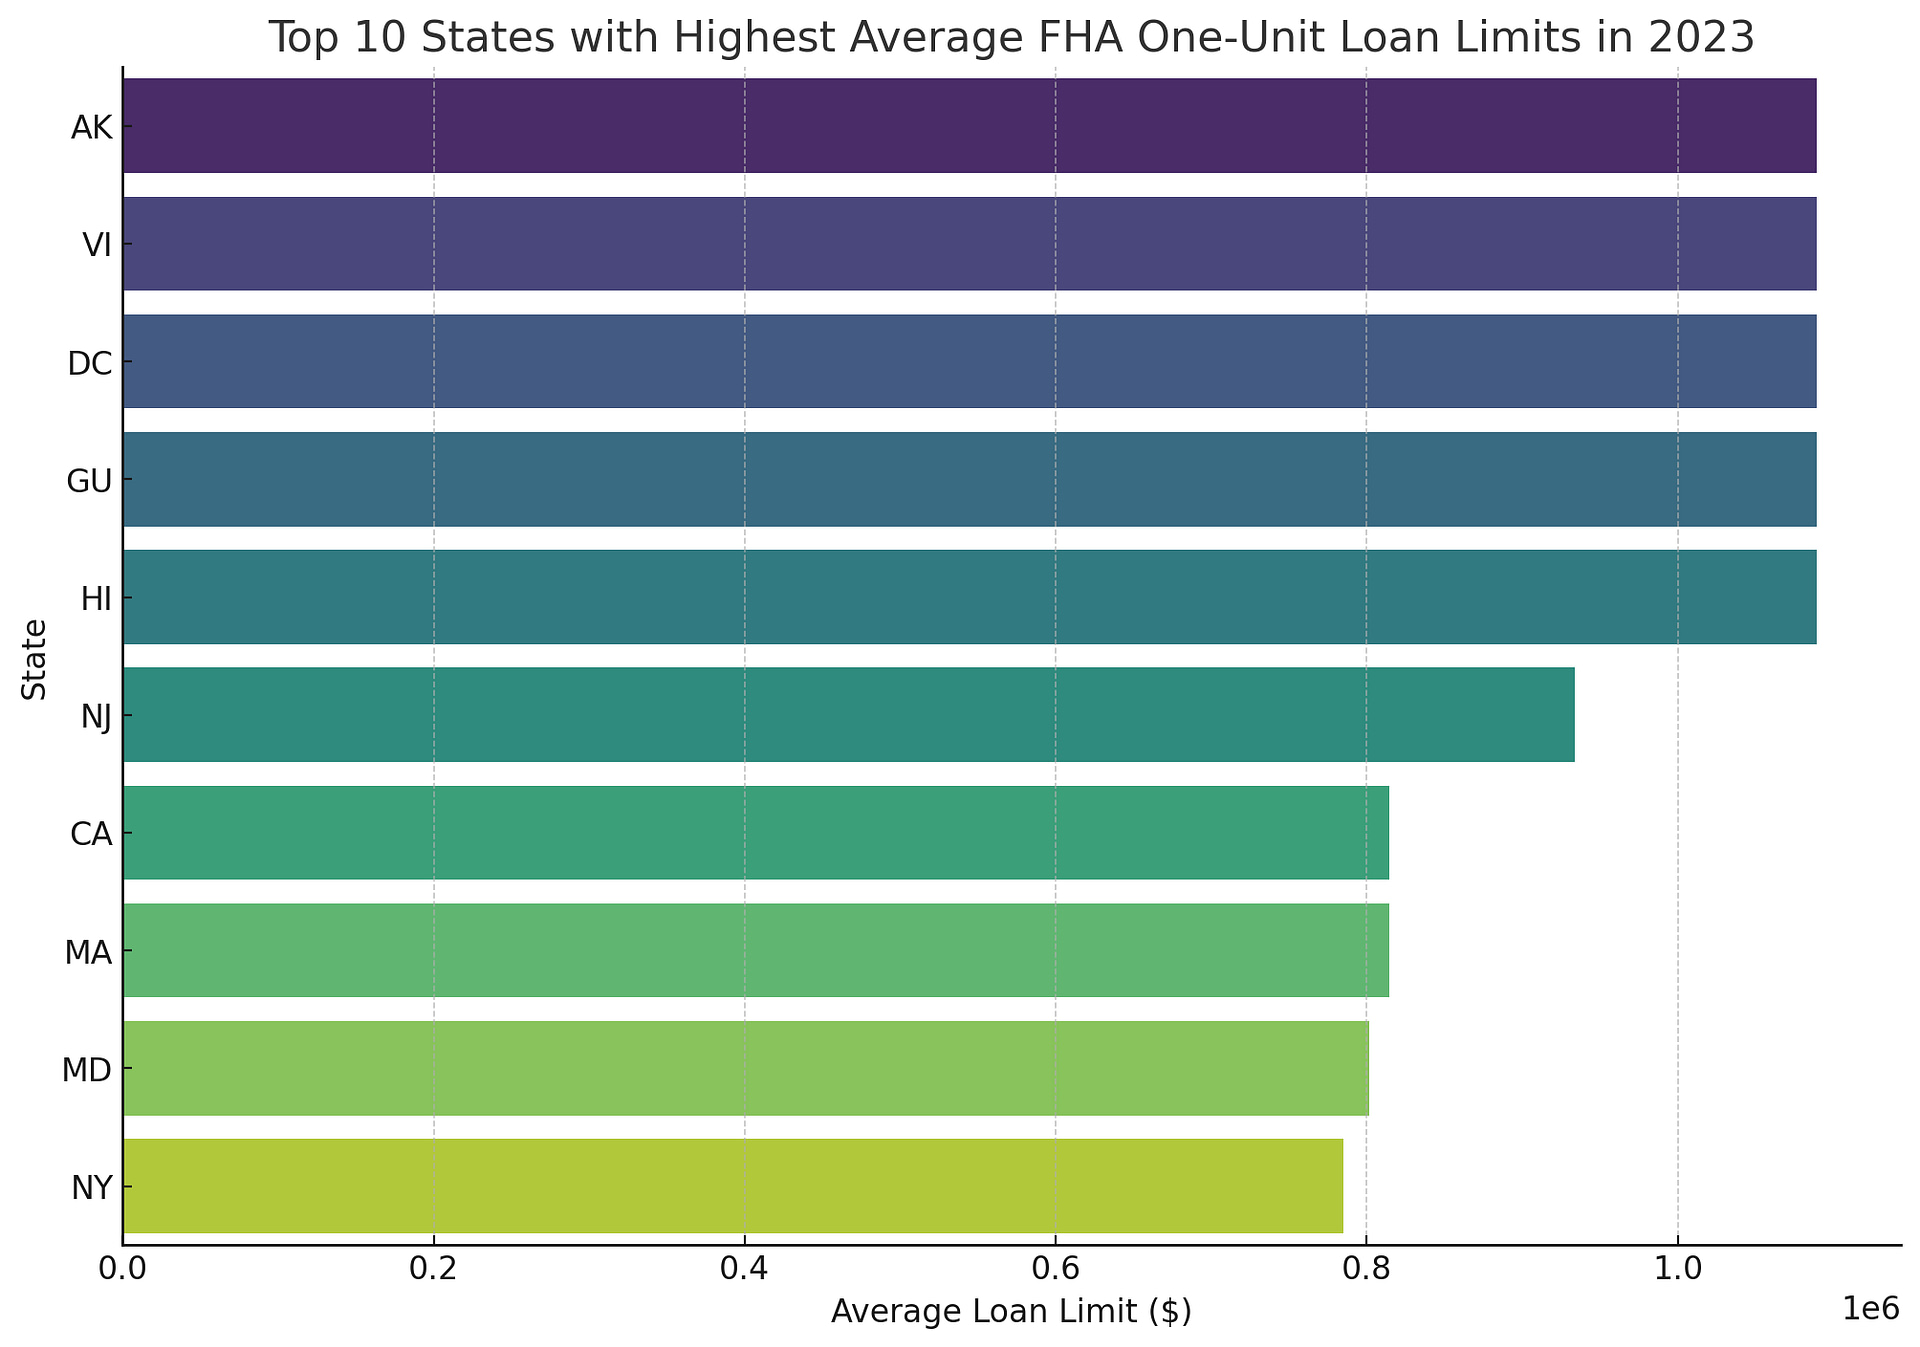 top 10 states with the highest average FHA one-unit loan limits in 2023